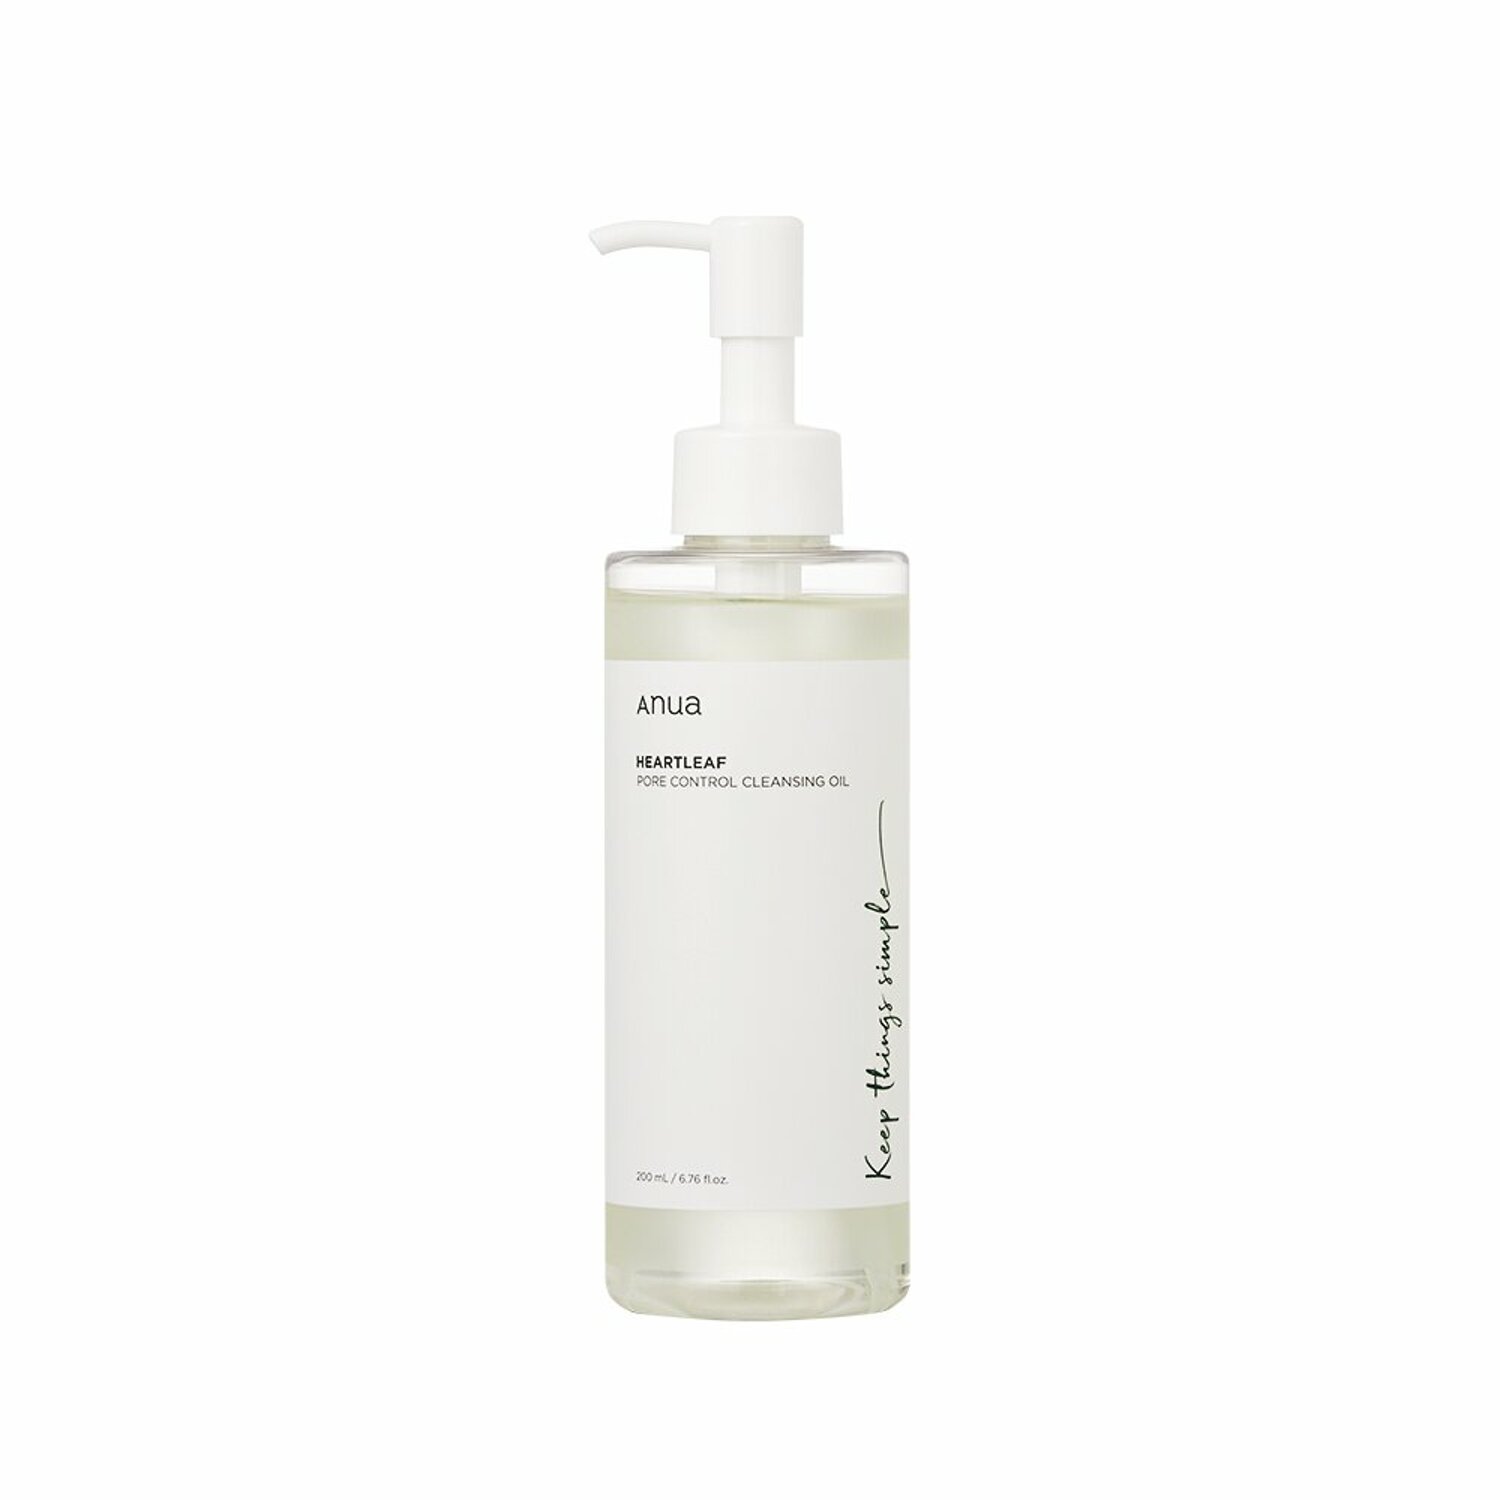 Anua Heartleaf Pore Control Cleansing Oil 200mL  | OLIVE YOUNG Global